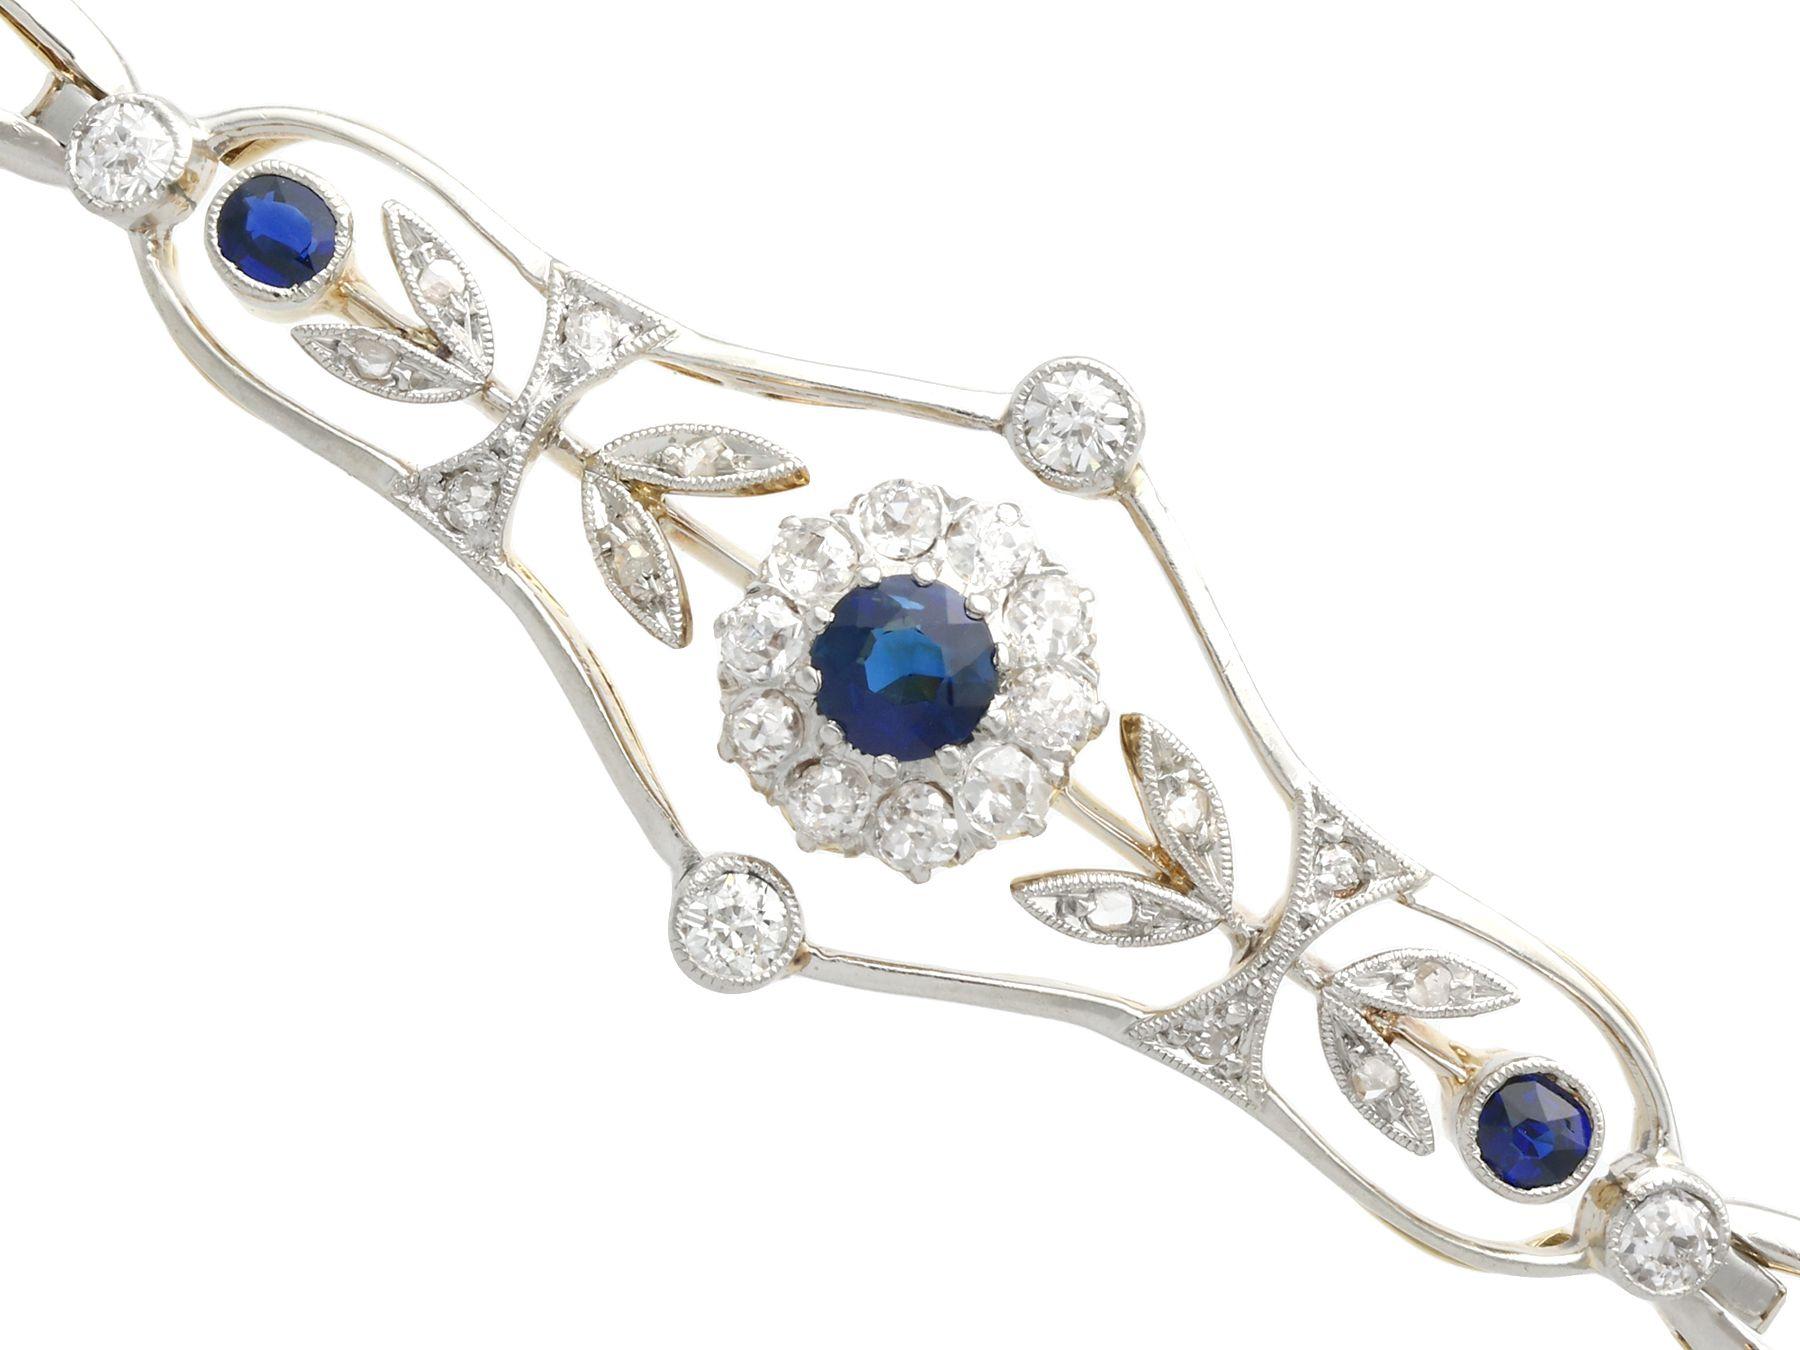 1920s Antique Sapphire and Diamond Yellow Gold Bracelet In Excellent Condition For Sale In Jesmond, Newcastle Upon Tyne